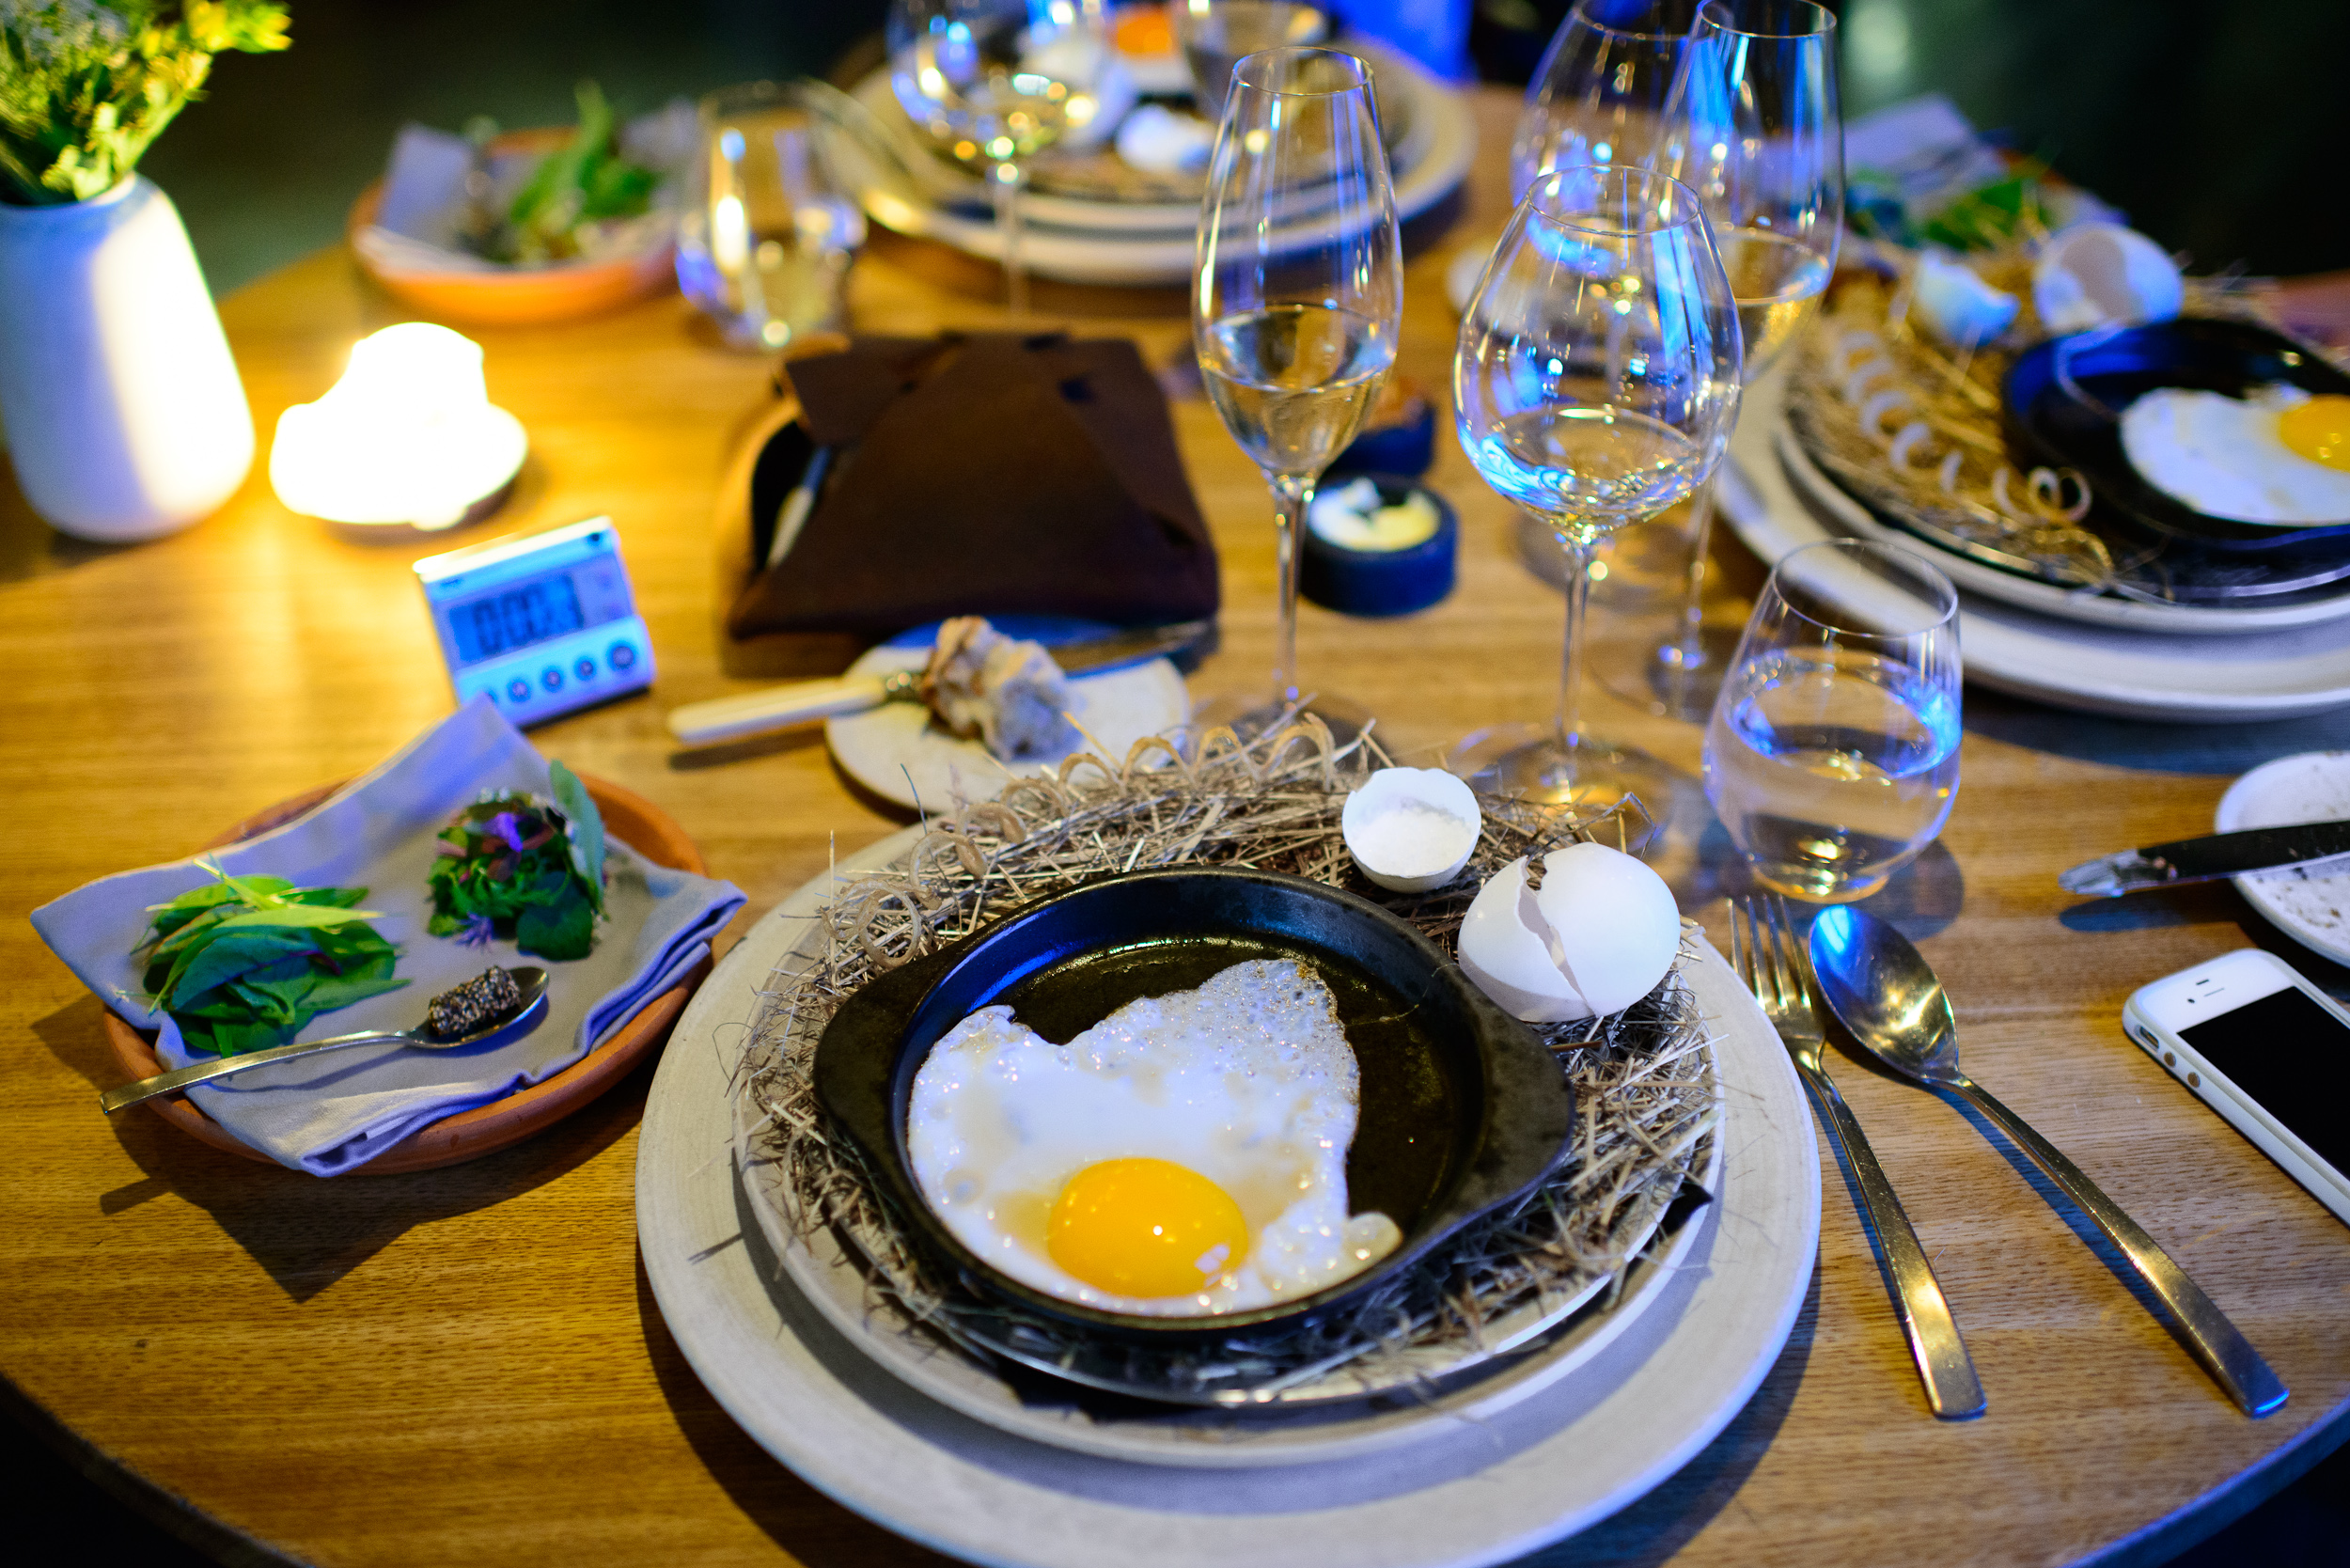 26th Course: Egg yolk and herbs - duck egg frying at the table